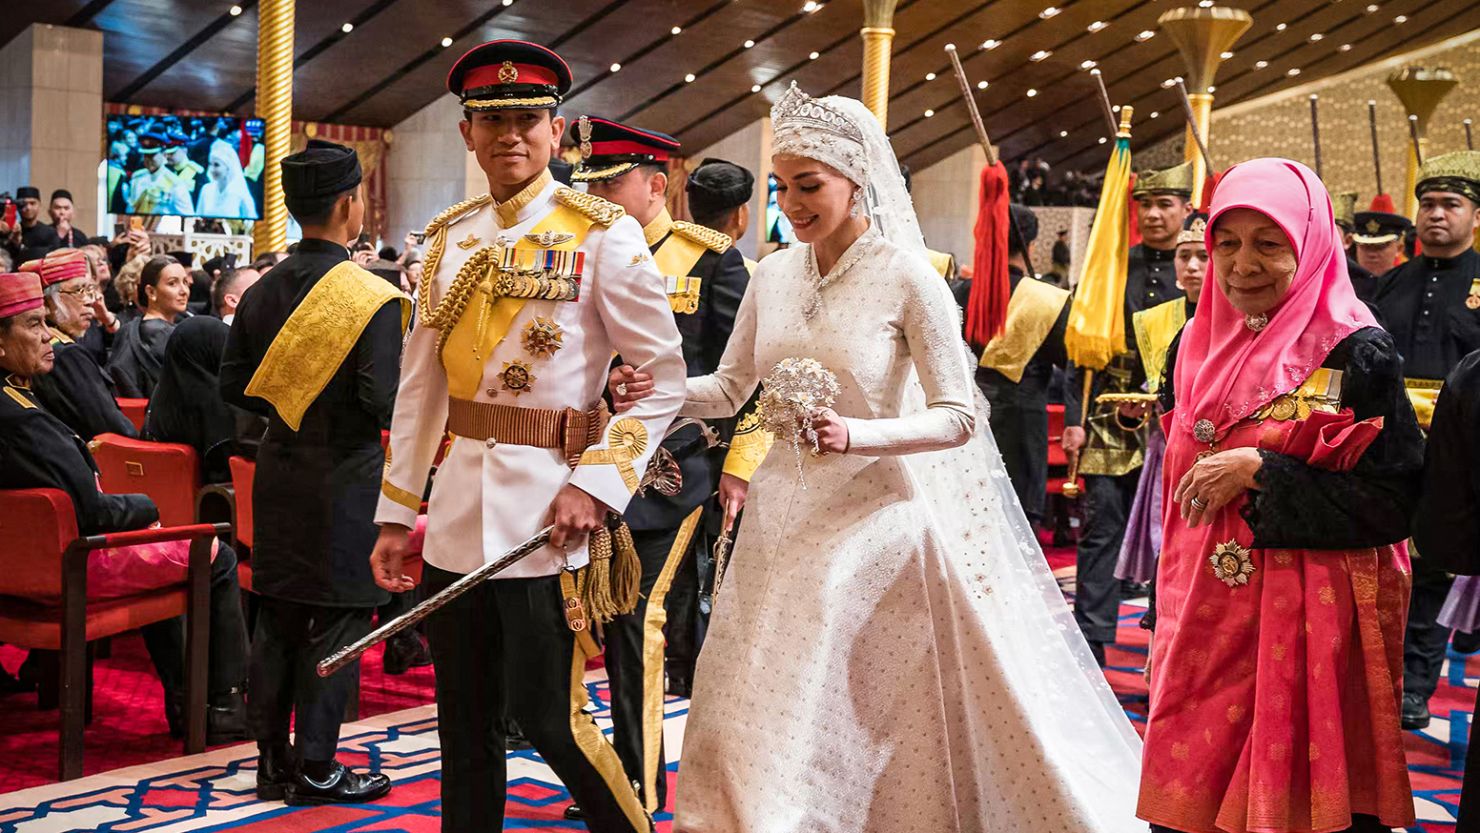 Prince Abdul Mateen (L) and Yang Mulia Anisha Rosnah walk down the aisle during their wedding reception at Istana Nurul Iman in Brunei's capital Bandar Seri Begawan on January 14, 2024. Lavish celebrations for the wedding of Brunei's Prince Abdul Mateen and his wife reached a climax on January 14 with a glittering ceremony attended by government leaders and blue-blooded guests from Asia and the Middle East.